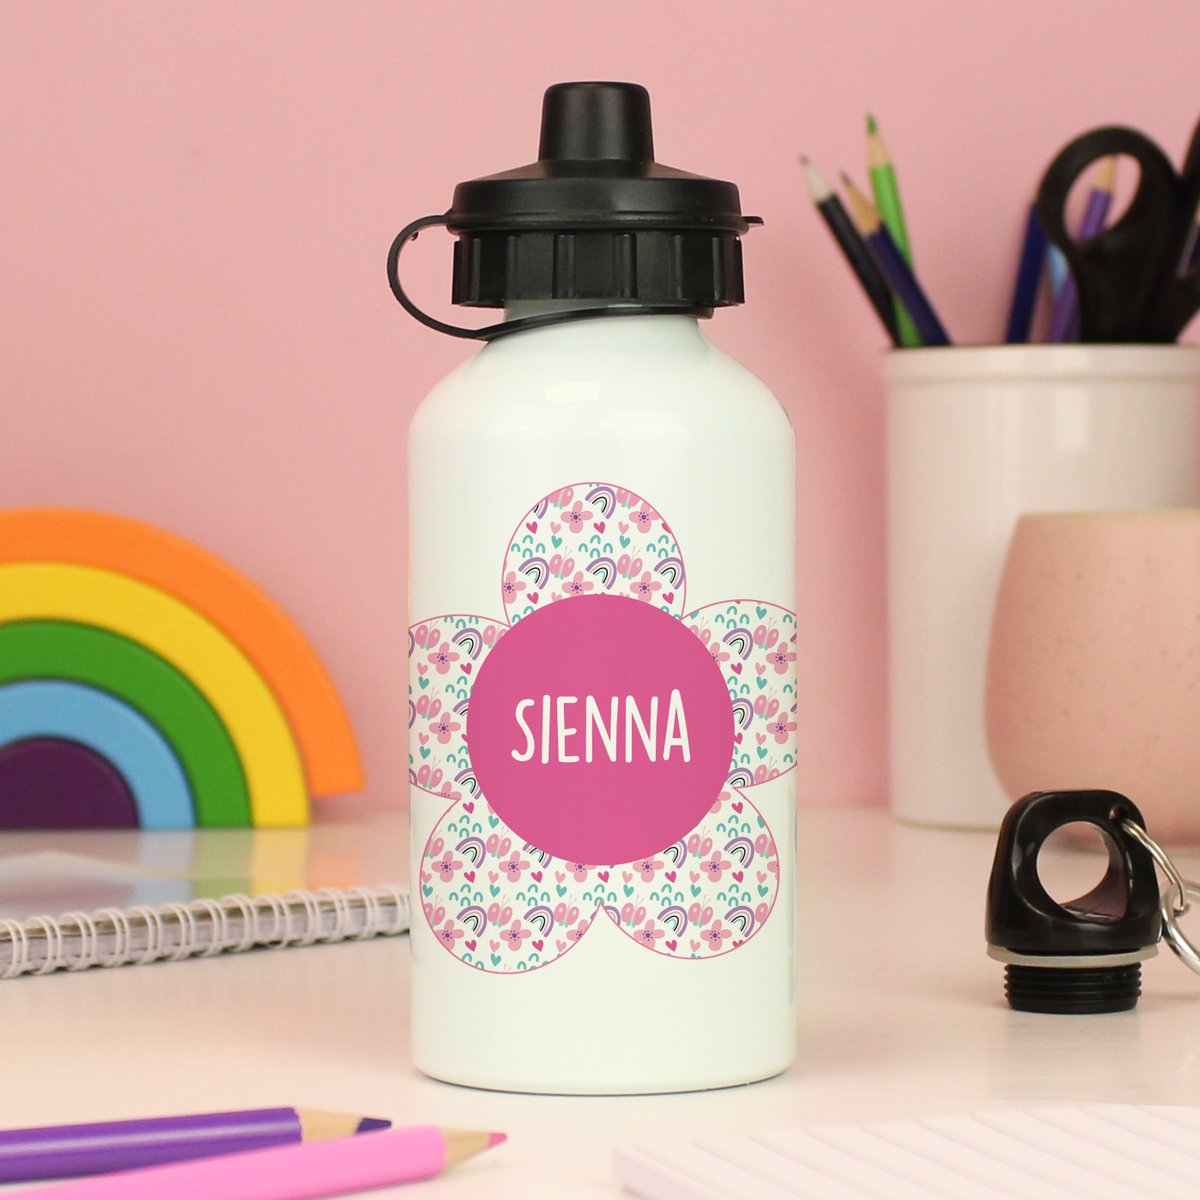 The perfect size for little hands, this kid's water bottle is made from strong but light weight aluminium & BPA free plastic for the top. Can be personalised with any name lilyblueuk.co.uk/childrens-gift…

#waterbottle #drinksbottle #lessplastic #forkids #personalised